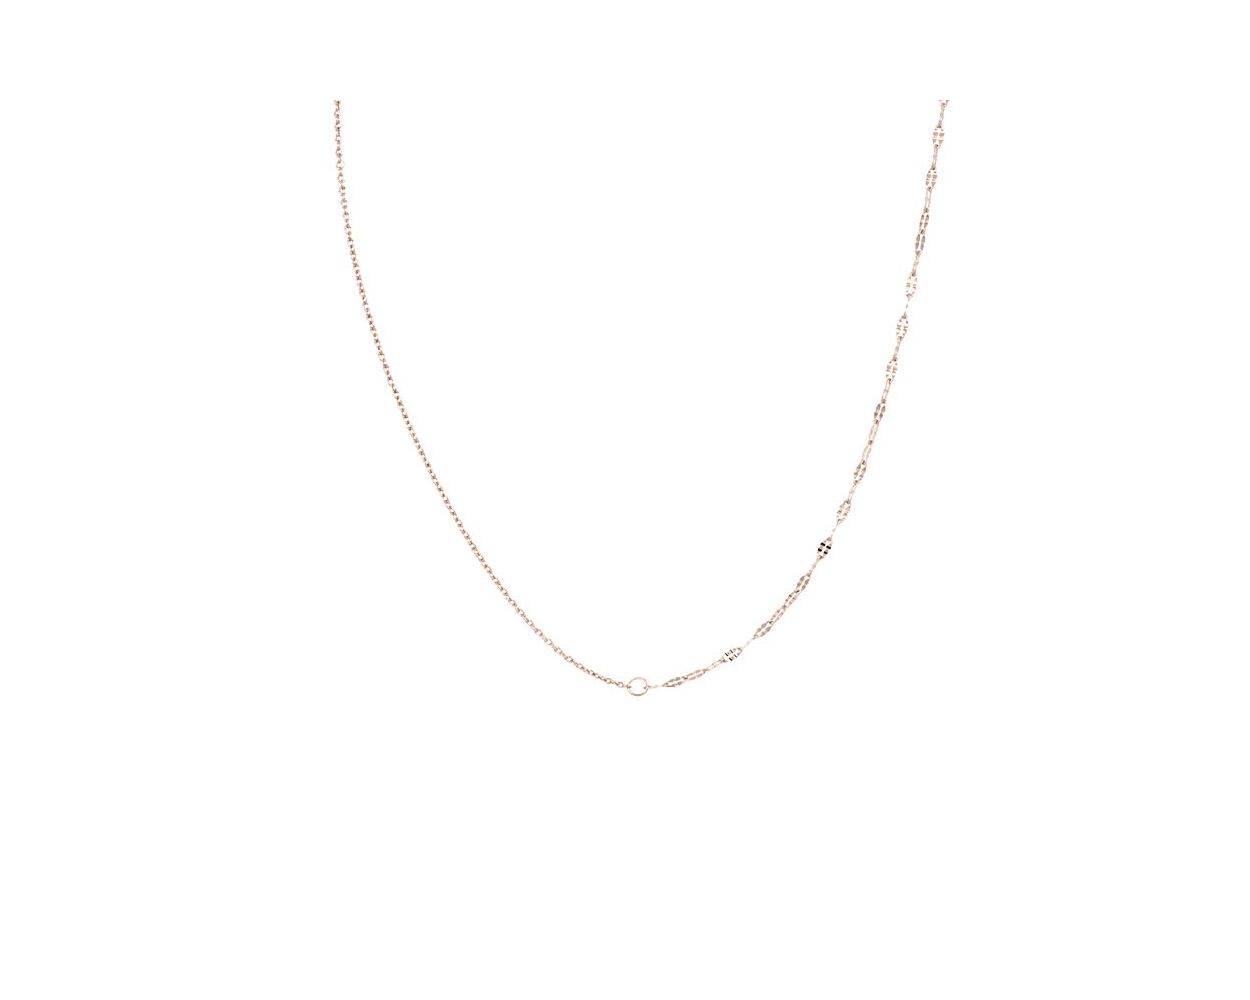 iXXXi Collier Imagination Rose - N04702